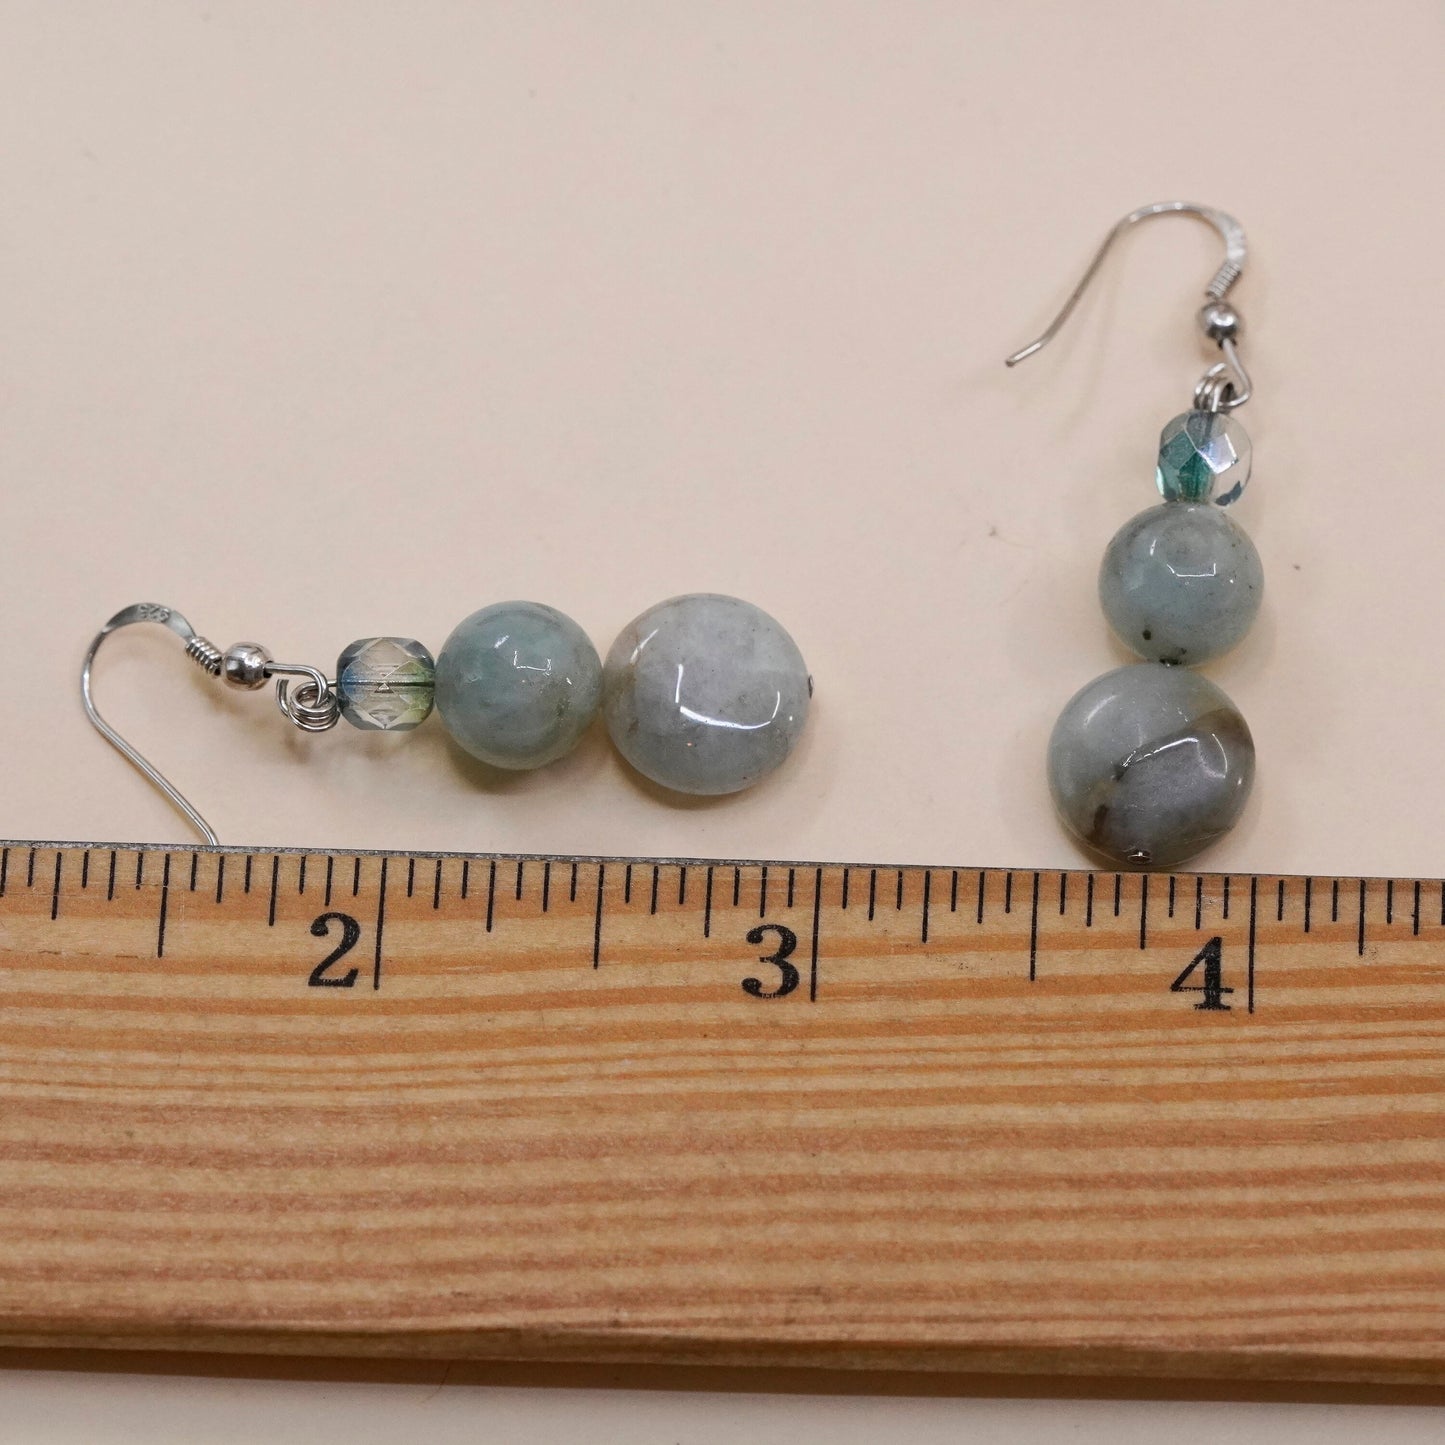 Vintage sterling silver handmade earrings, 925 hooks with jade and topaz beads